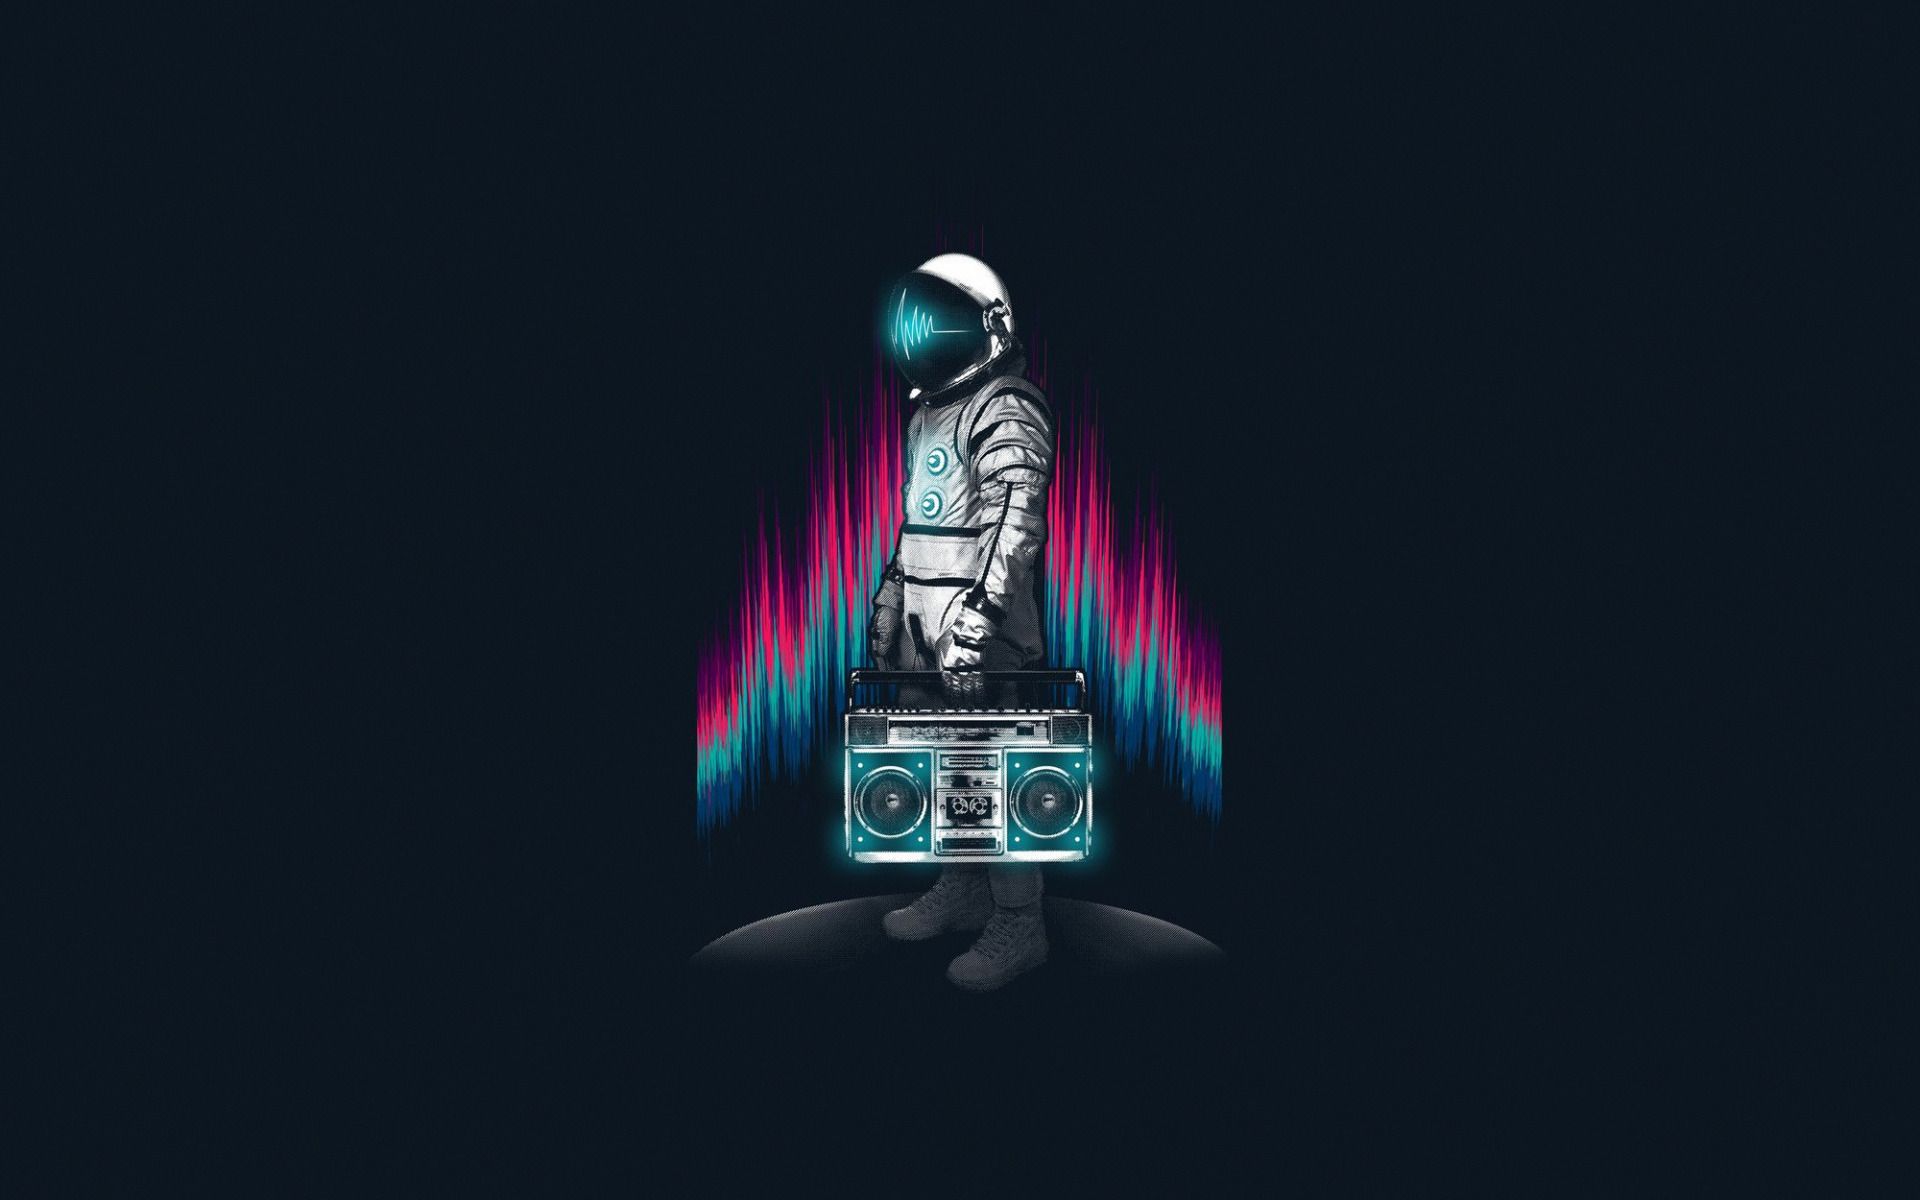 Download wallpaper Minimalism, Music, The suit, Style, Astronaut, Background, Astronaut, Art, Art, Music, Style, Tape, Background, Minimalism, Astronaut, Cosmonaut, section minimalism in resolution 1920x1200